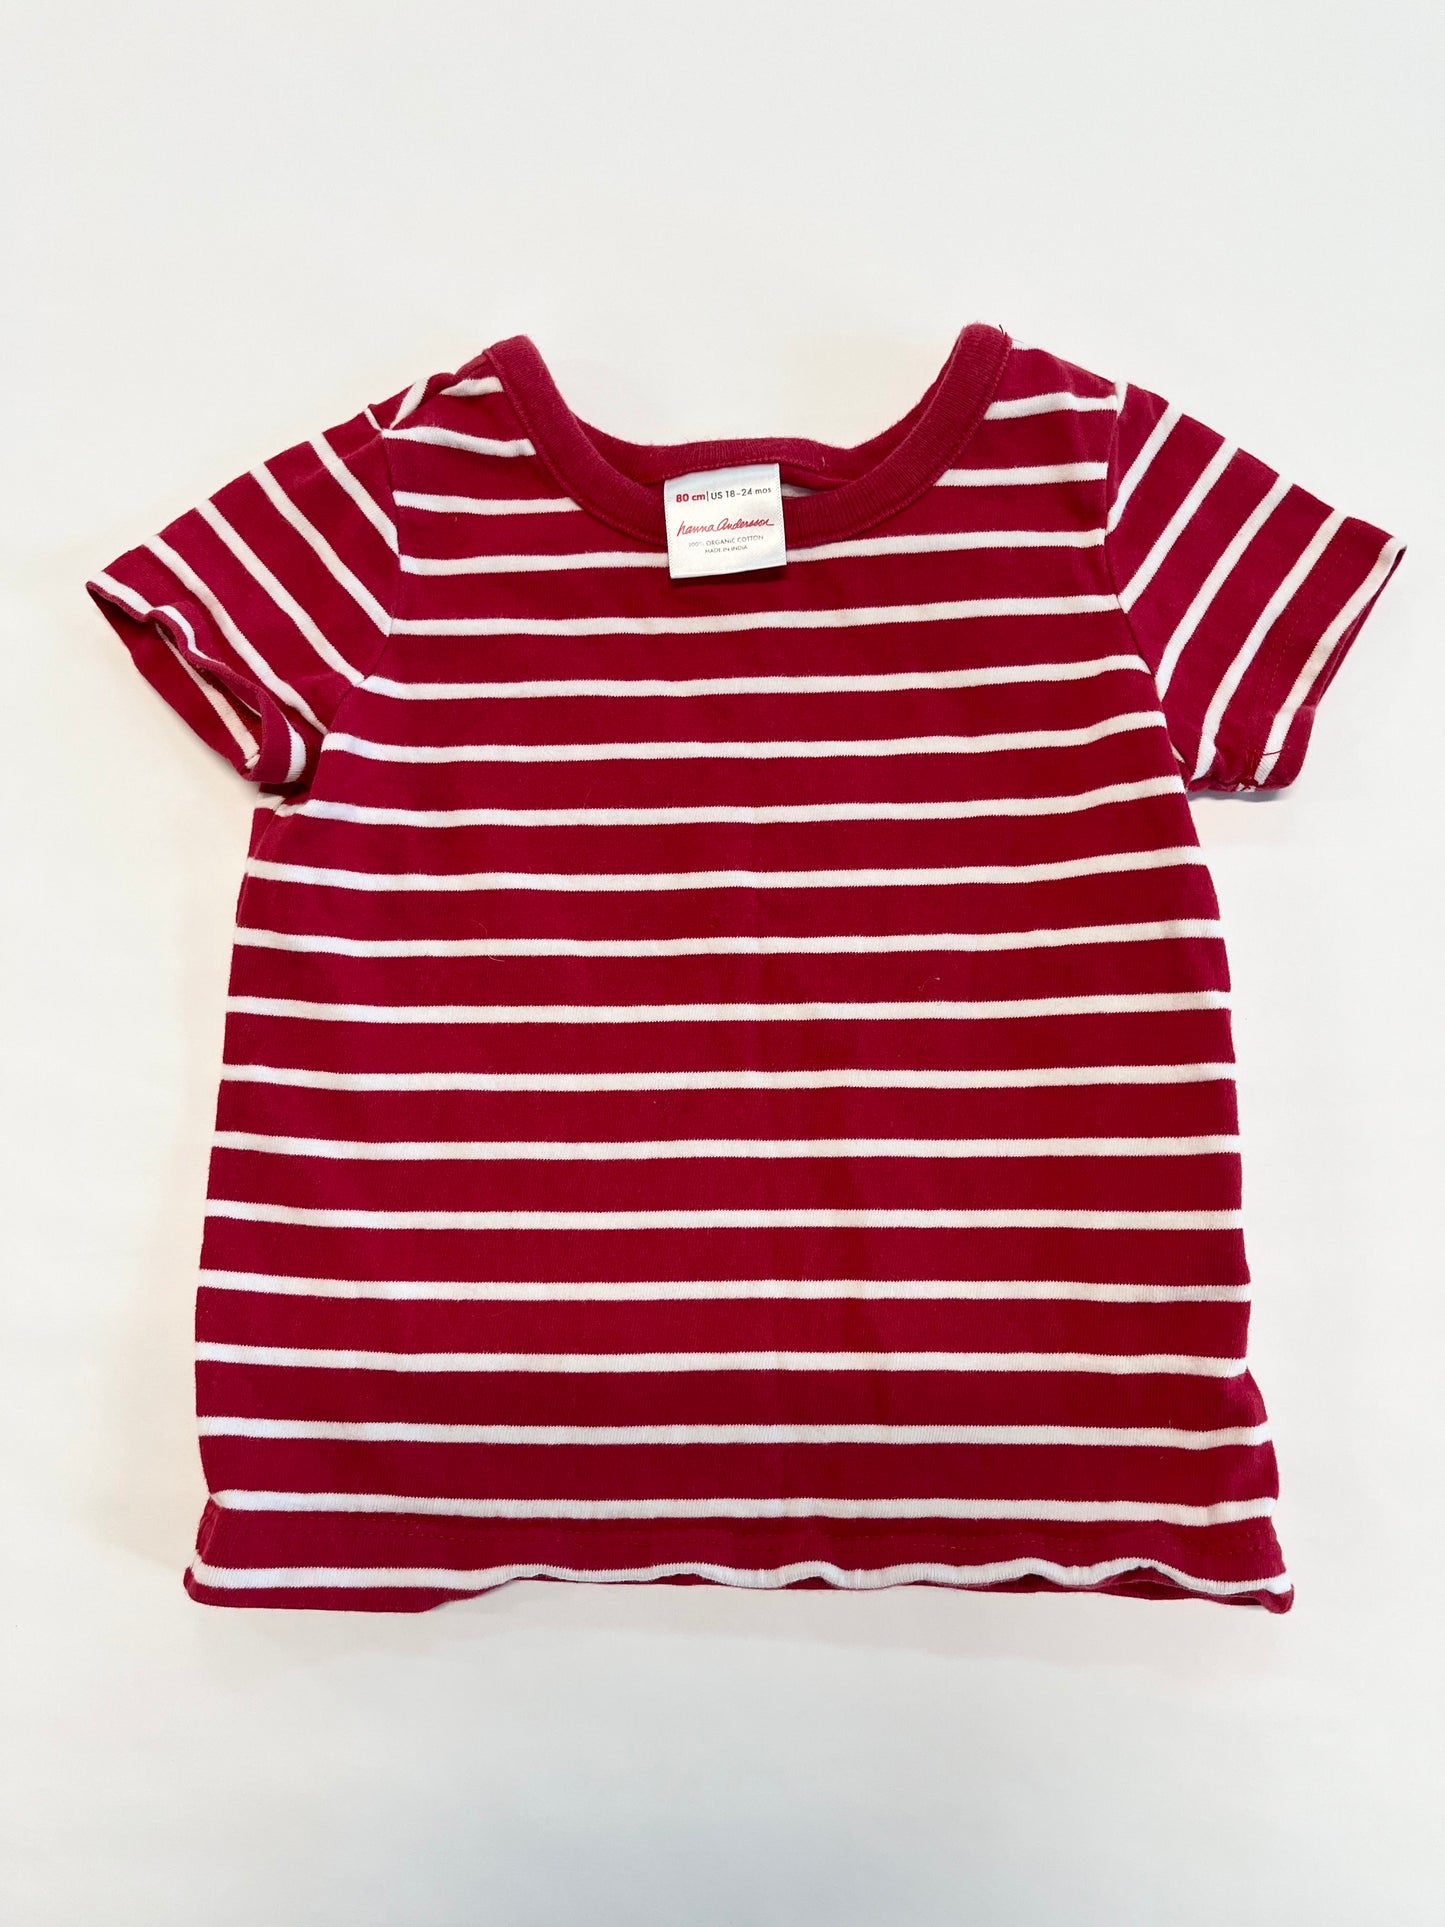 Hanna Andersson red striped tee 18-24 months